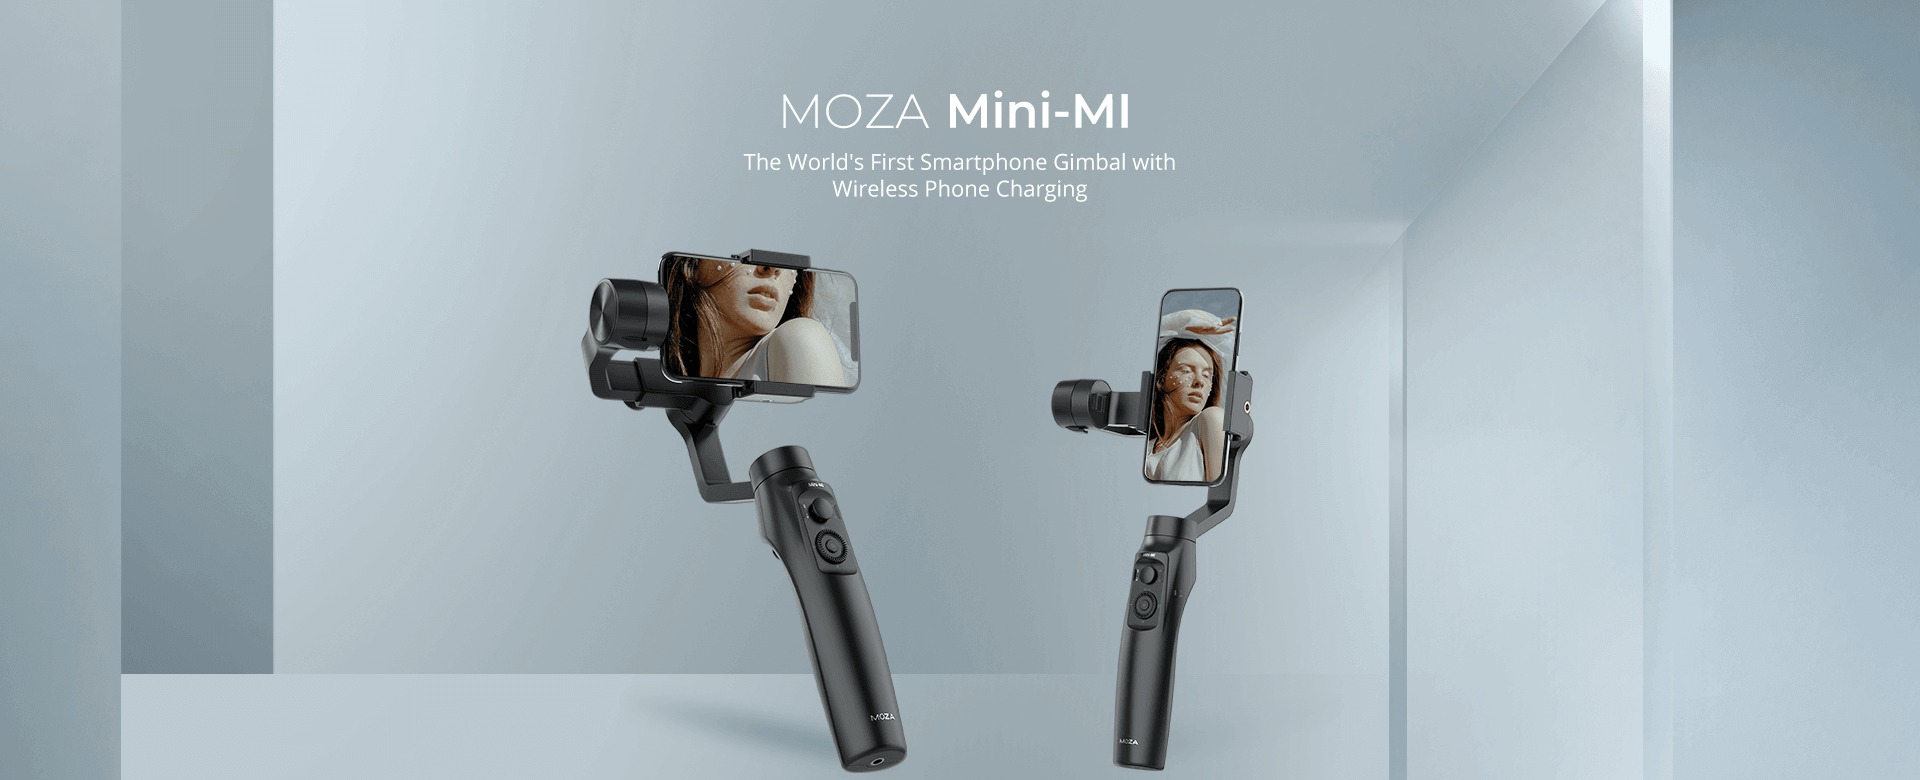 The World's First Smartphone Gimbal with Wireless Phone Charging